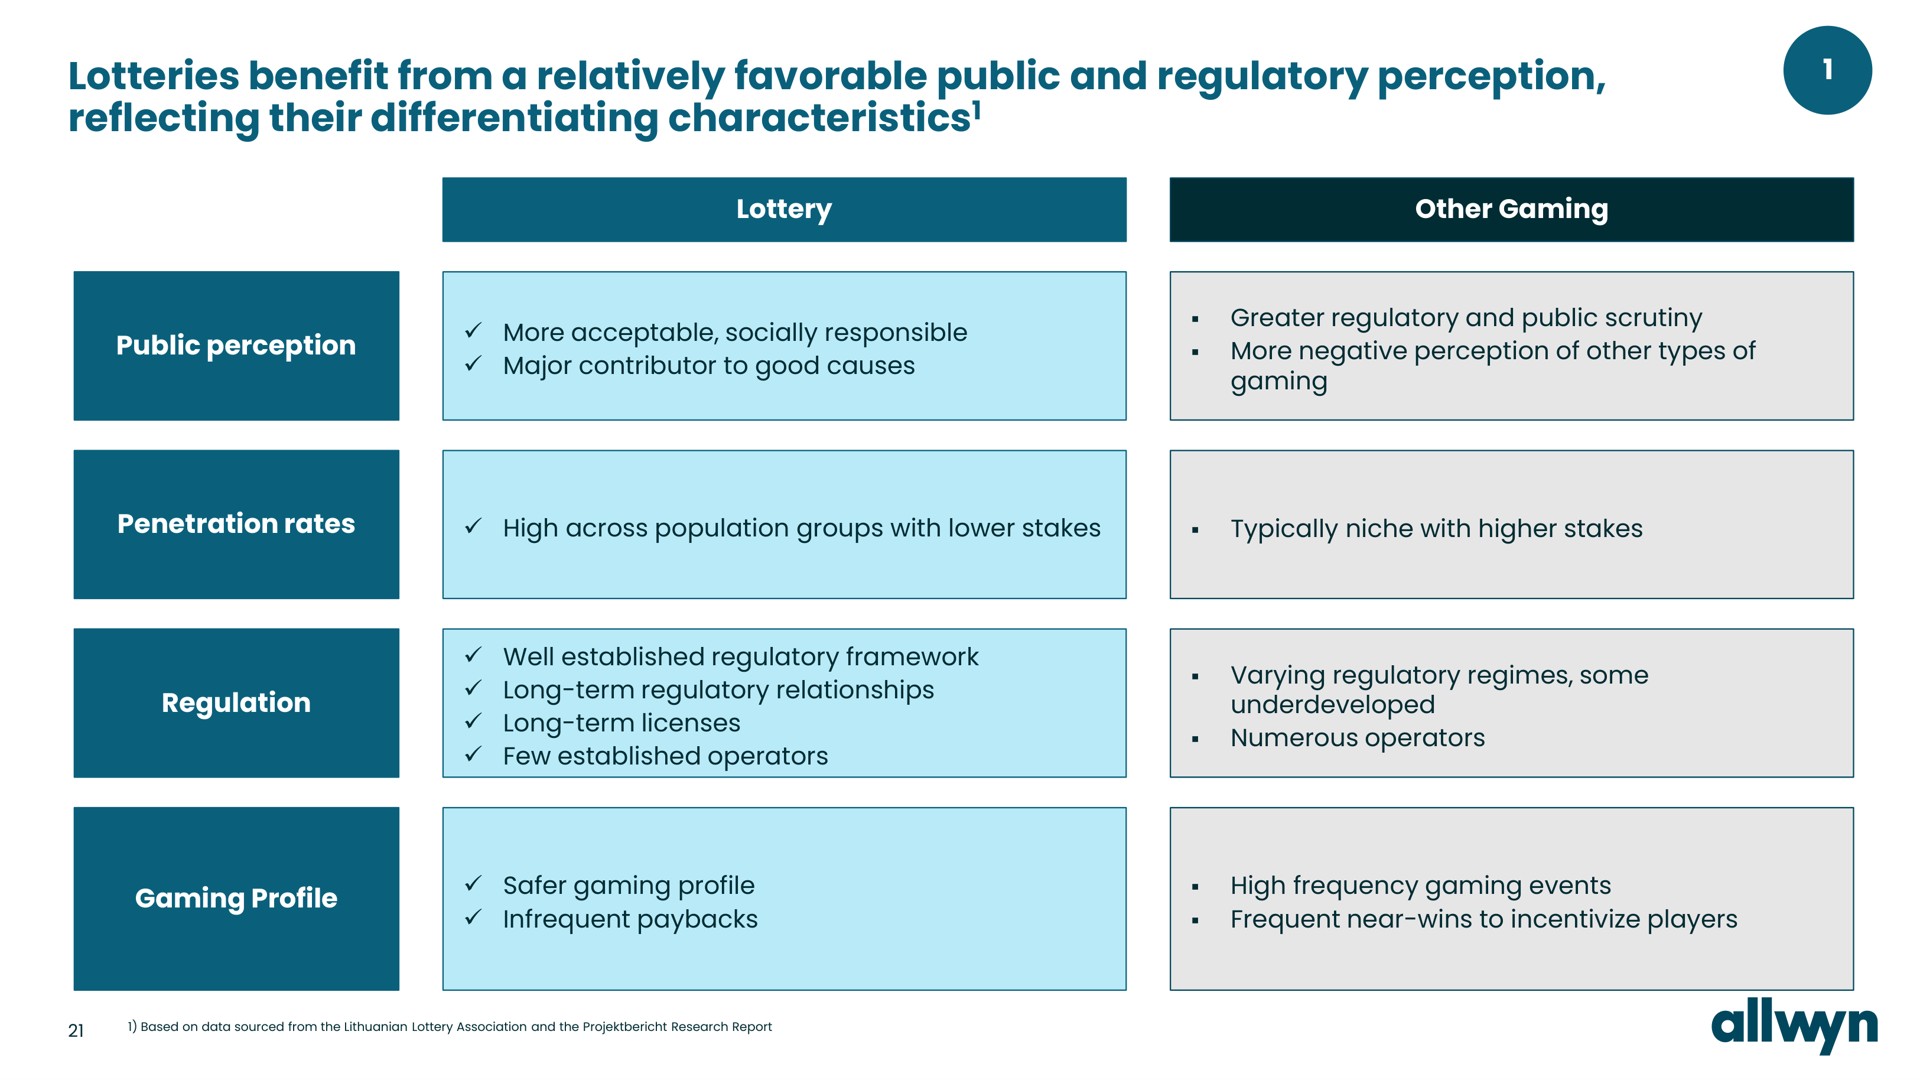 lotteries benefit from a relatively favorable public and regulatory perception reflecting their differentiating characteristics characteristics | Allwyn